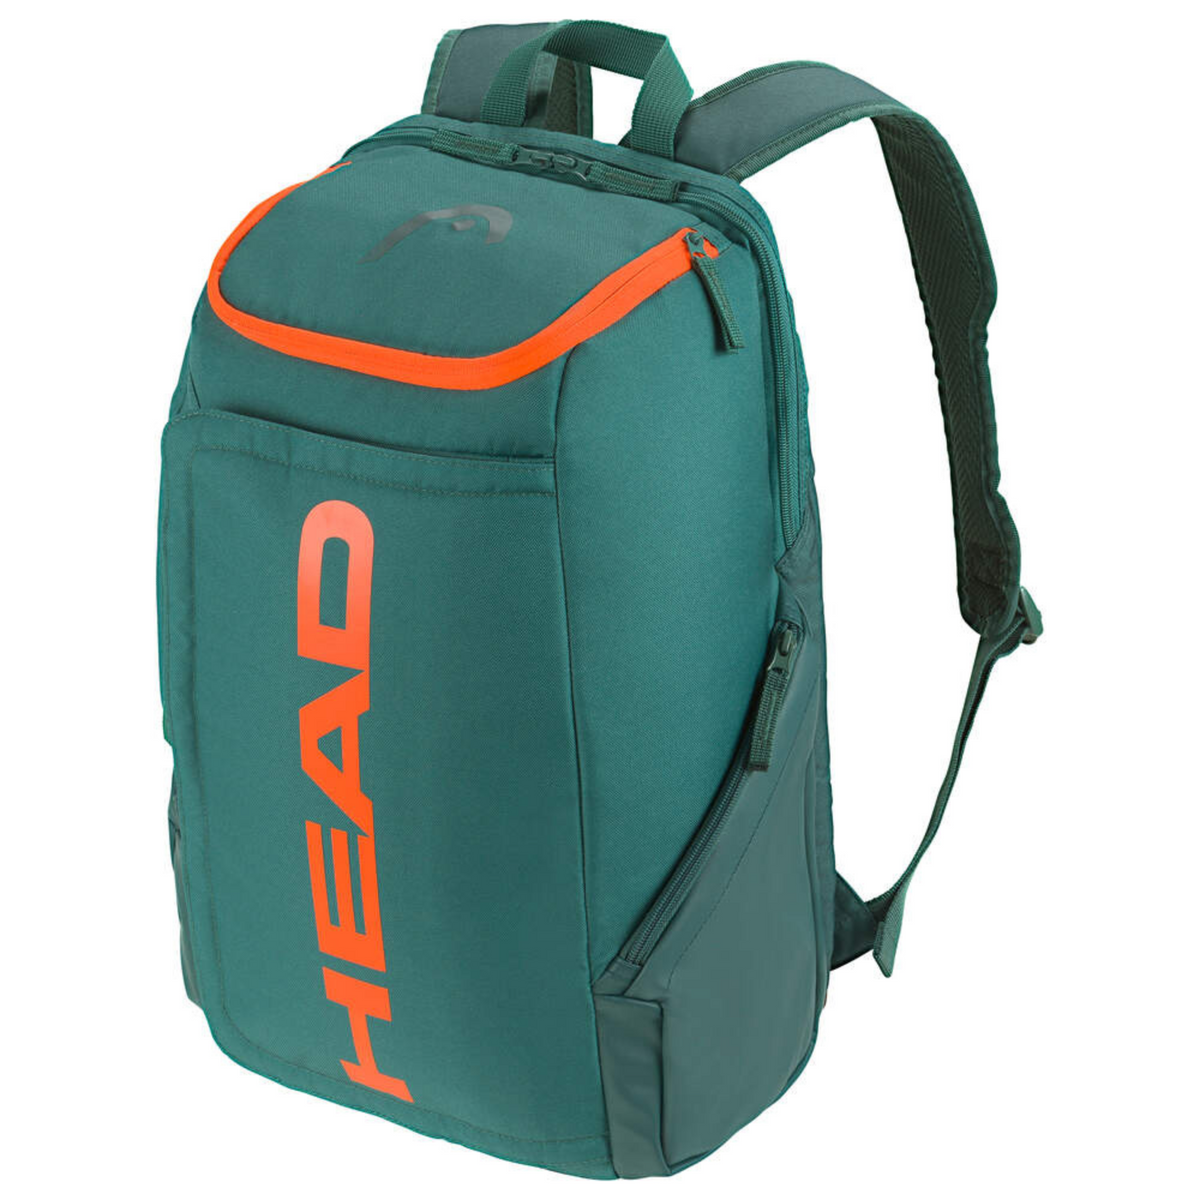 Head pickleball backpack for accessories